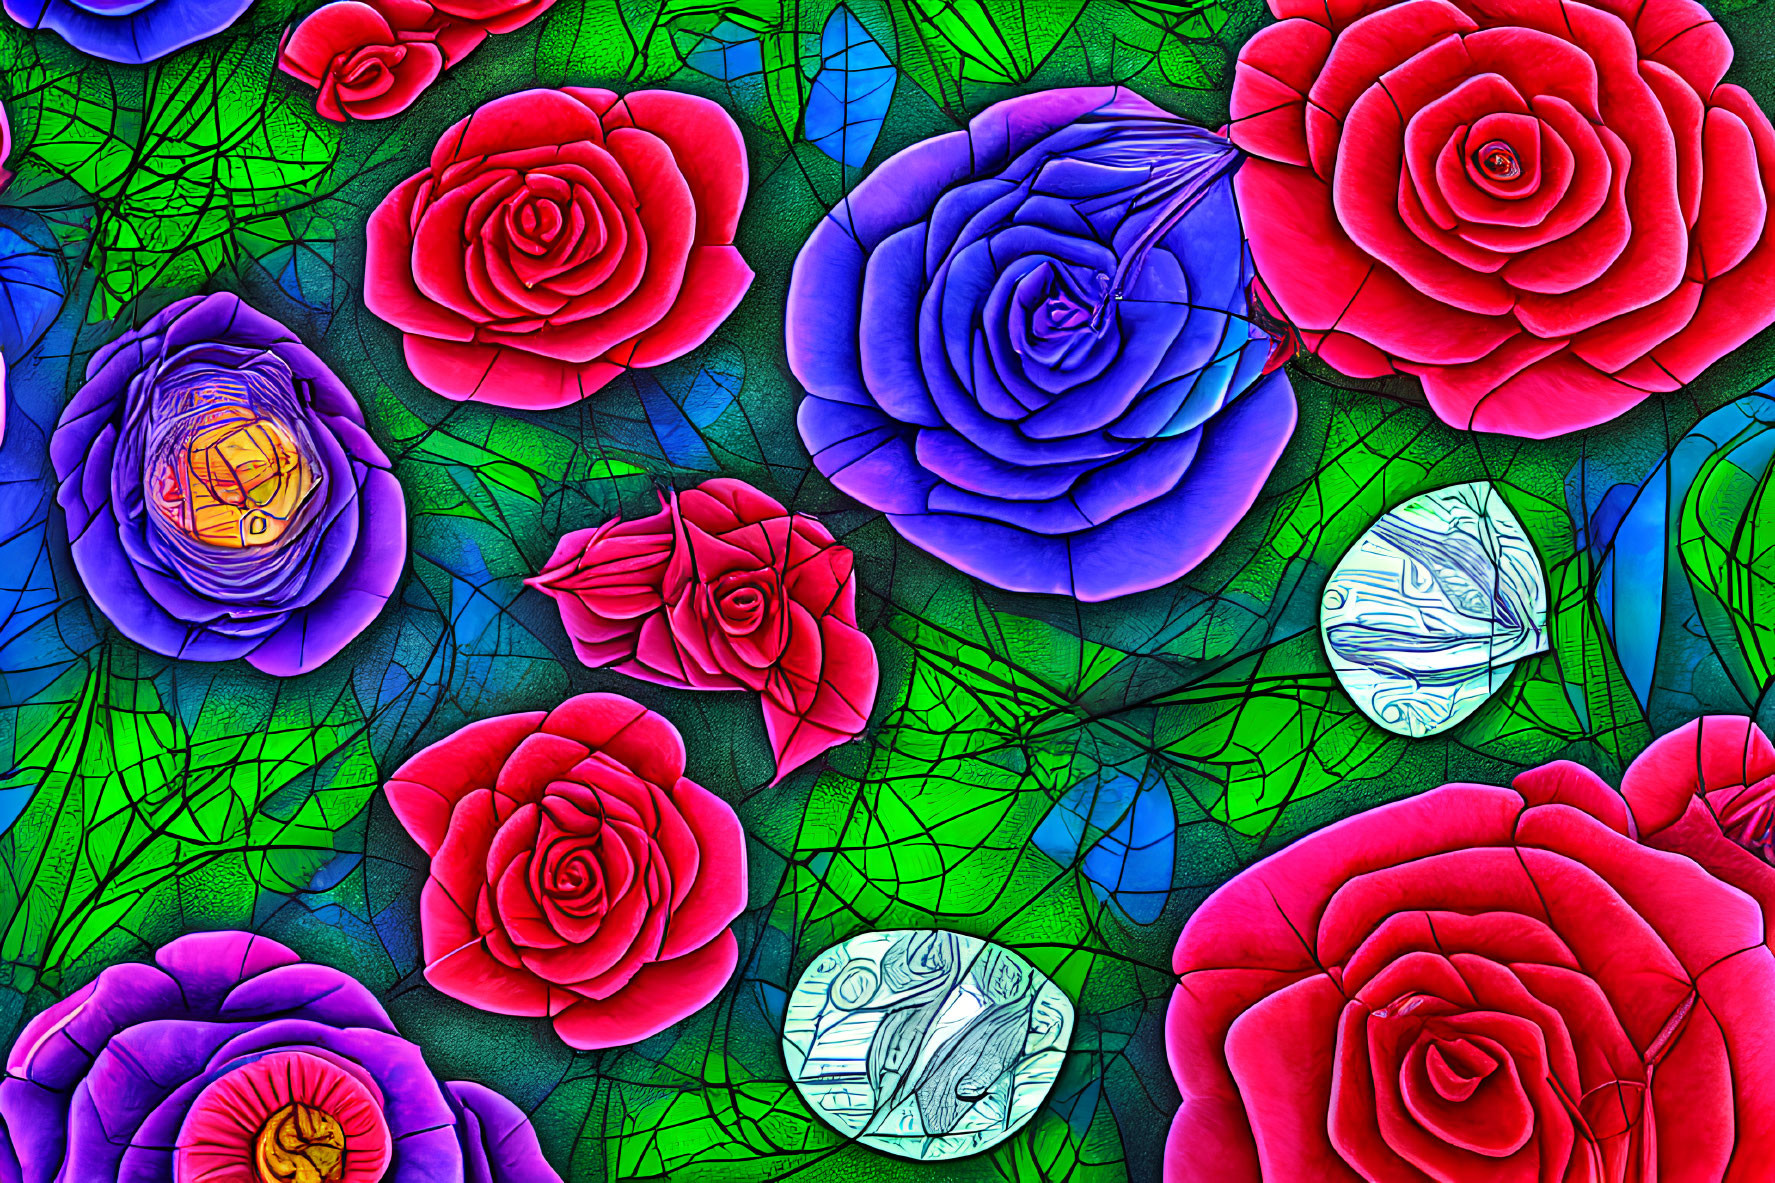 Colorful Digital Art: Red, Purple, and Blue Roses with Leaf Patterns